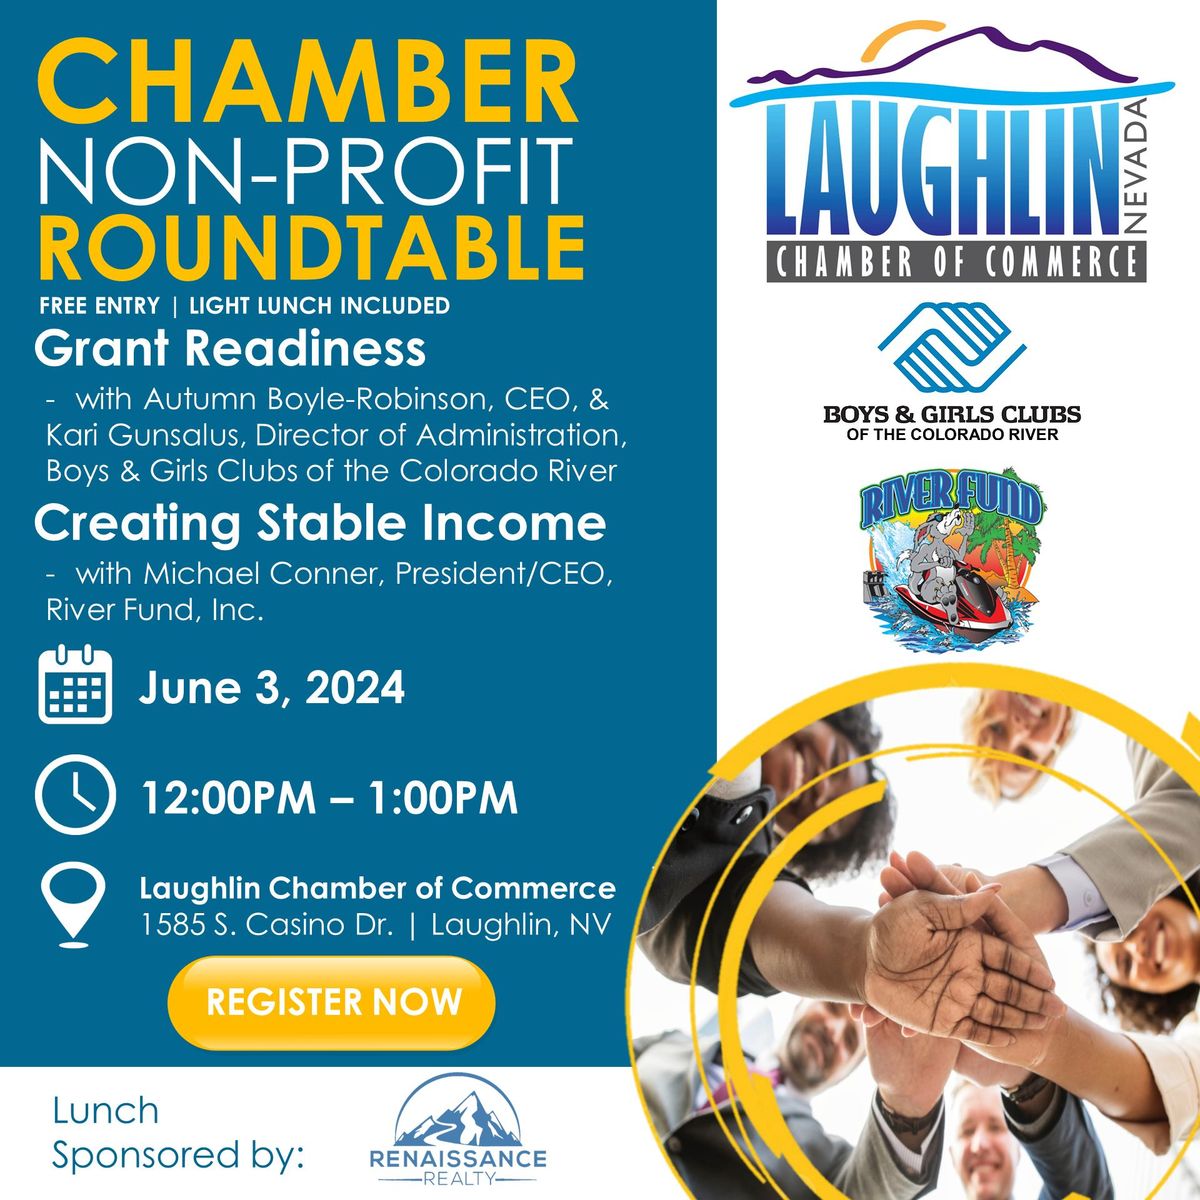 Chamber Non-Profit Roundtable: Grant Readiness & Creating A Stable Income